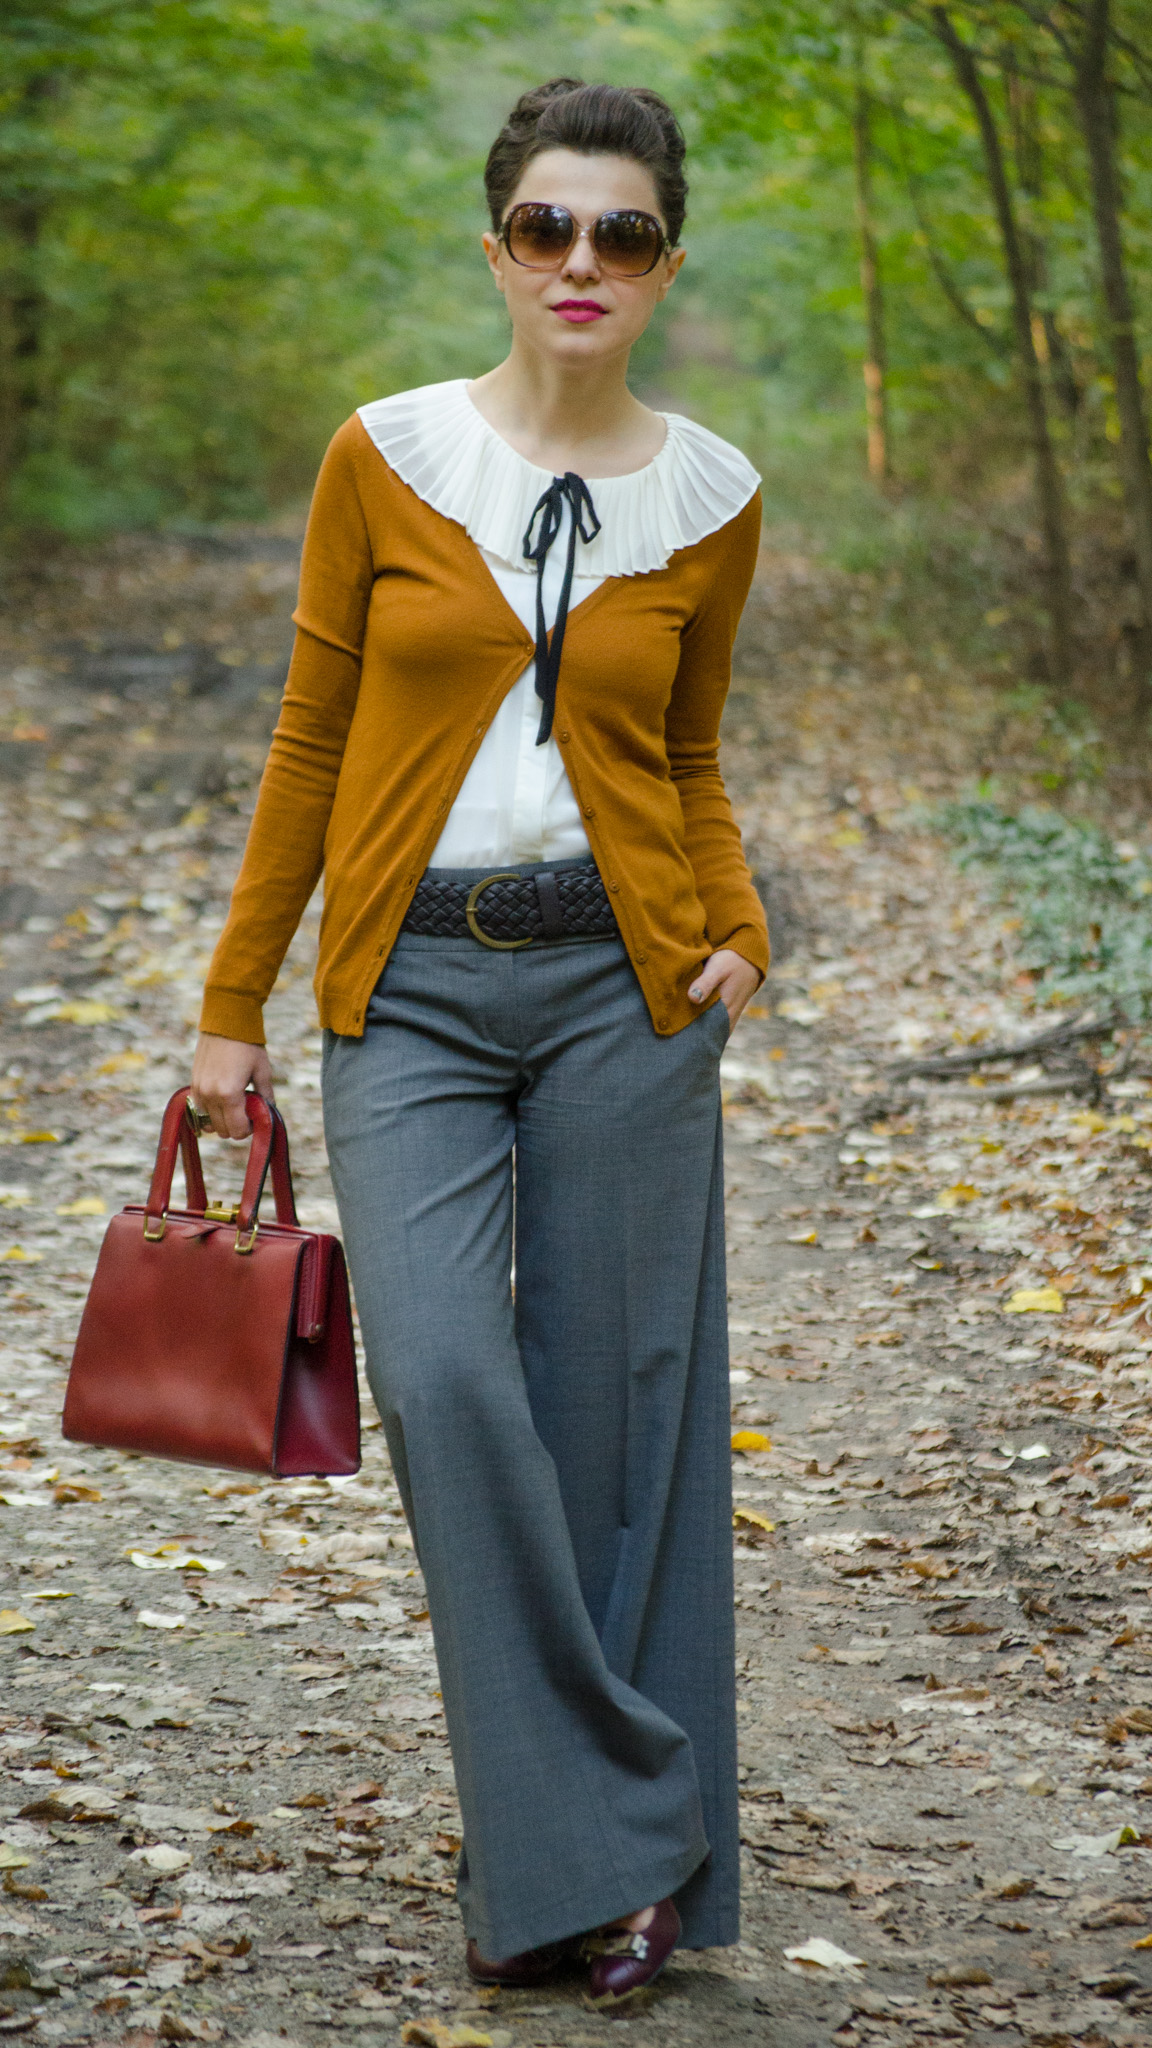 grey flare pants peter pan collar ivoire shirt black bow tie burgundy bag autumn outfit forest cardigan